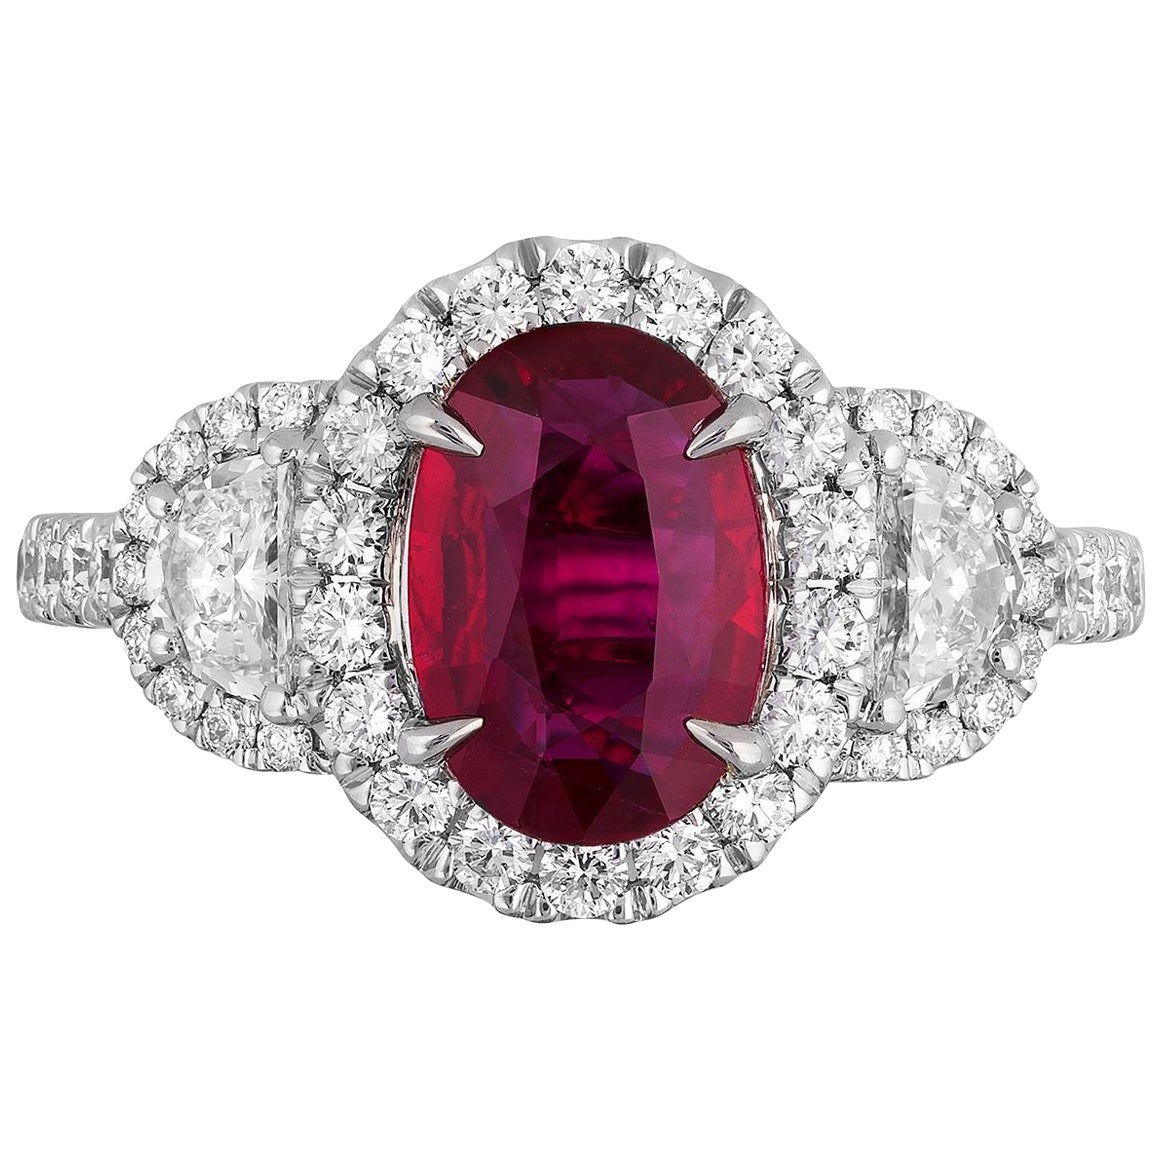 1.52 Carat Ruby and Diamond Ring For Sale at 1stDibs